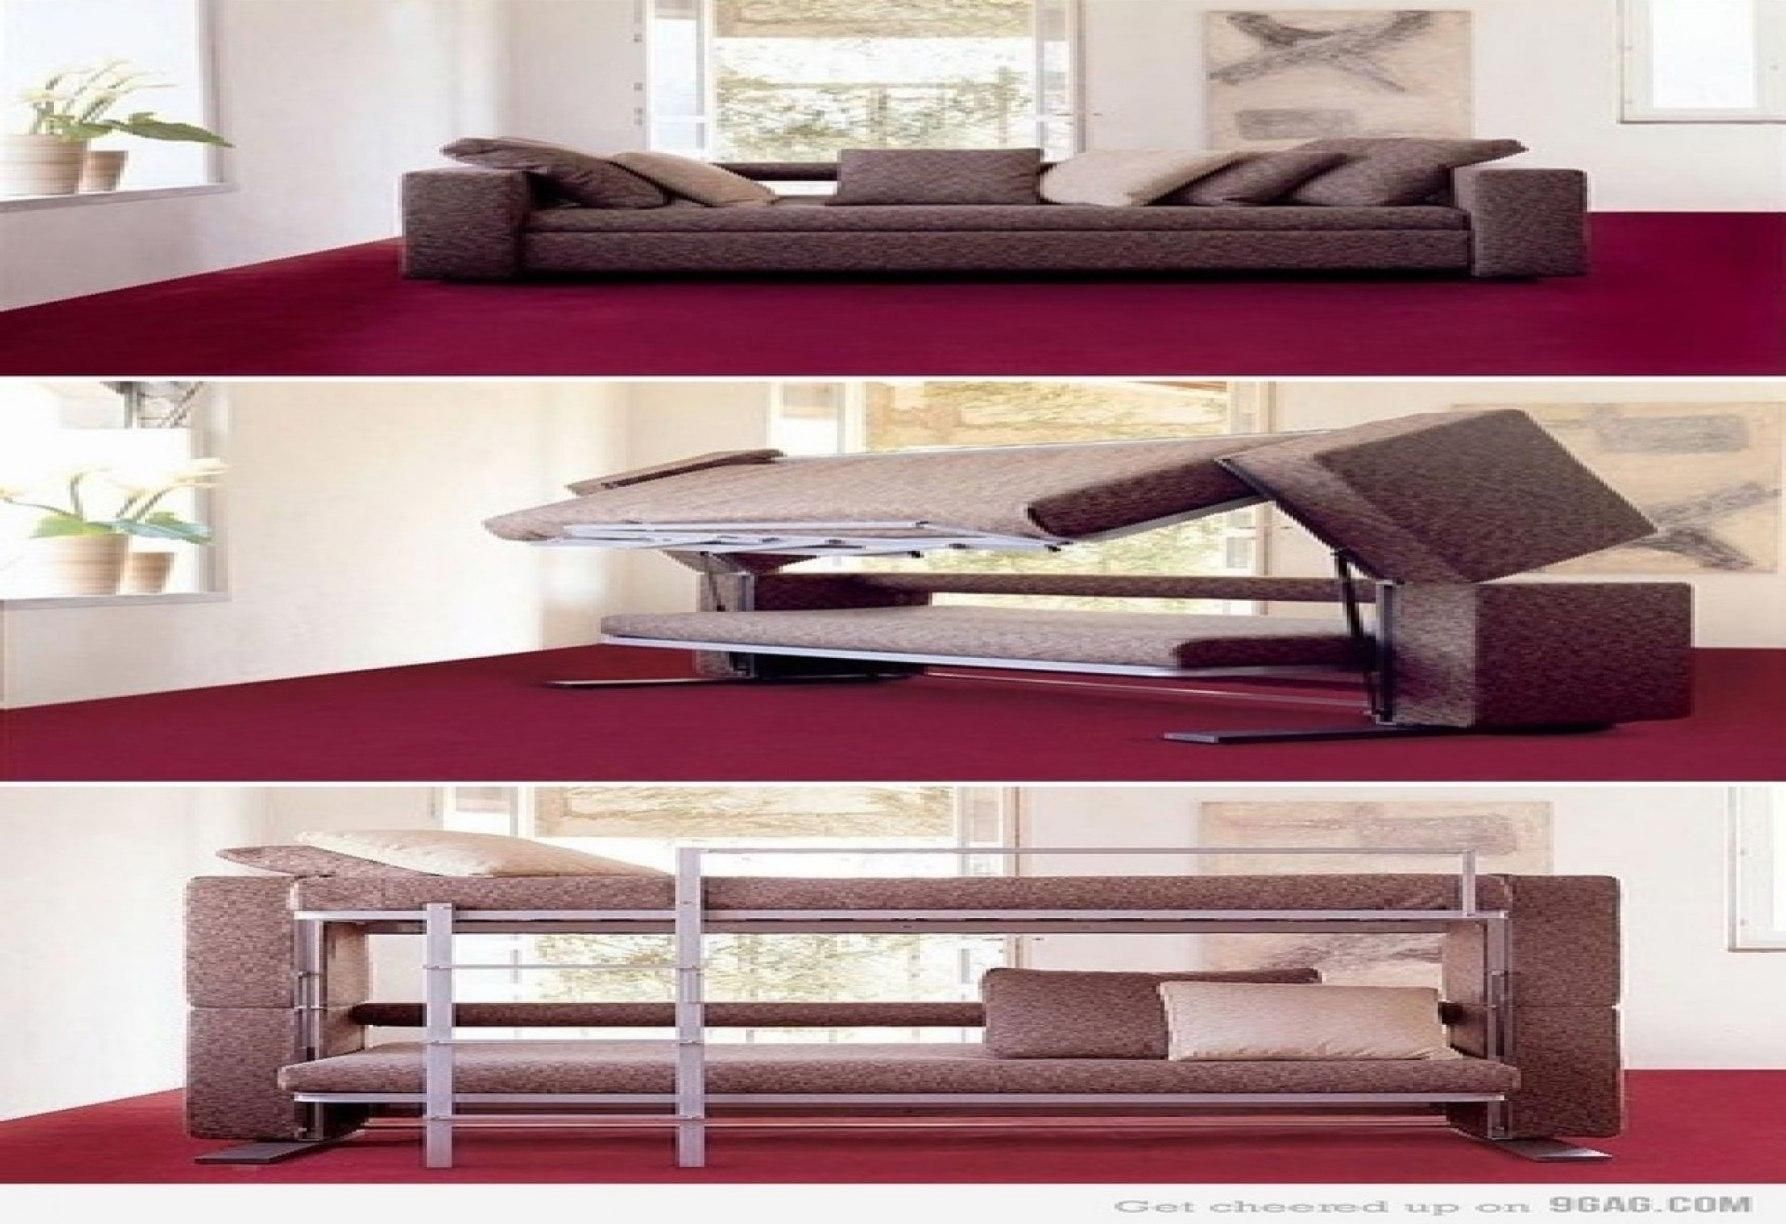 Bunk Beds : Bunk Bed Sofa Ikea Couch Bunk Bed Convertible Bunk Bedss Pertaining To Sofas Converts To Bunk Bed (View 1 of 20)